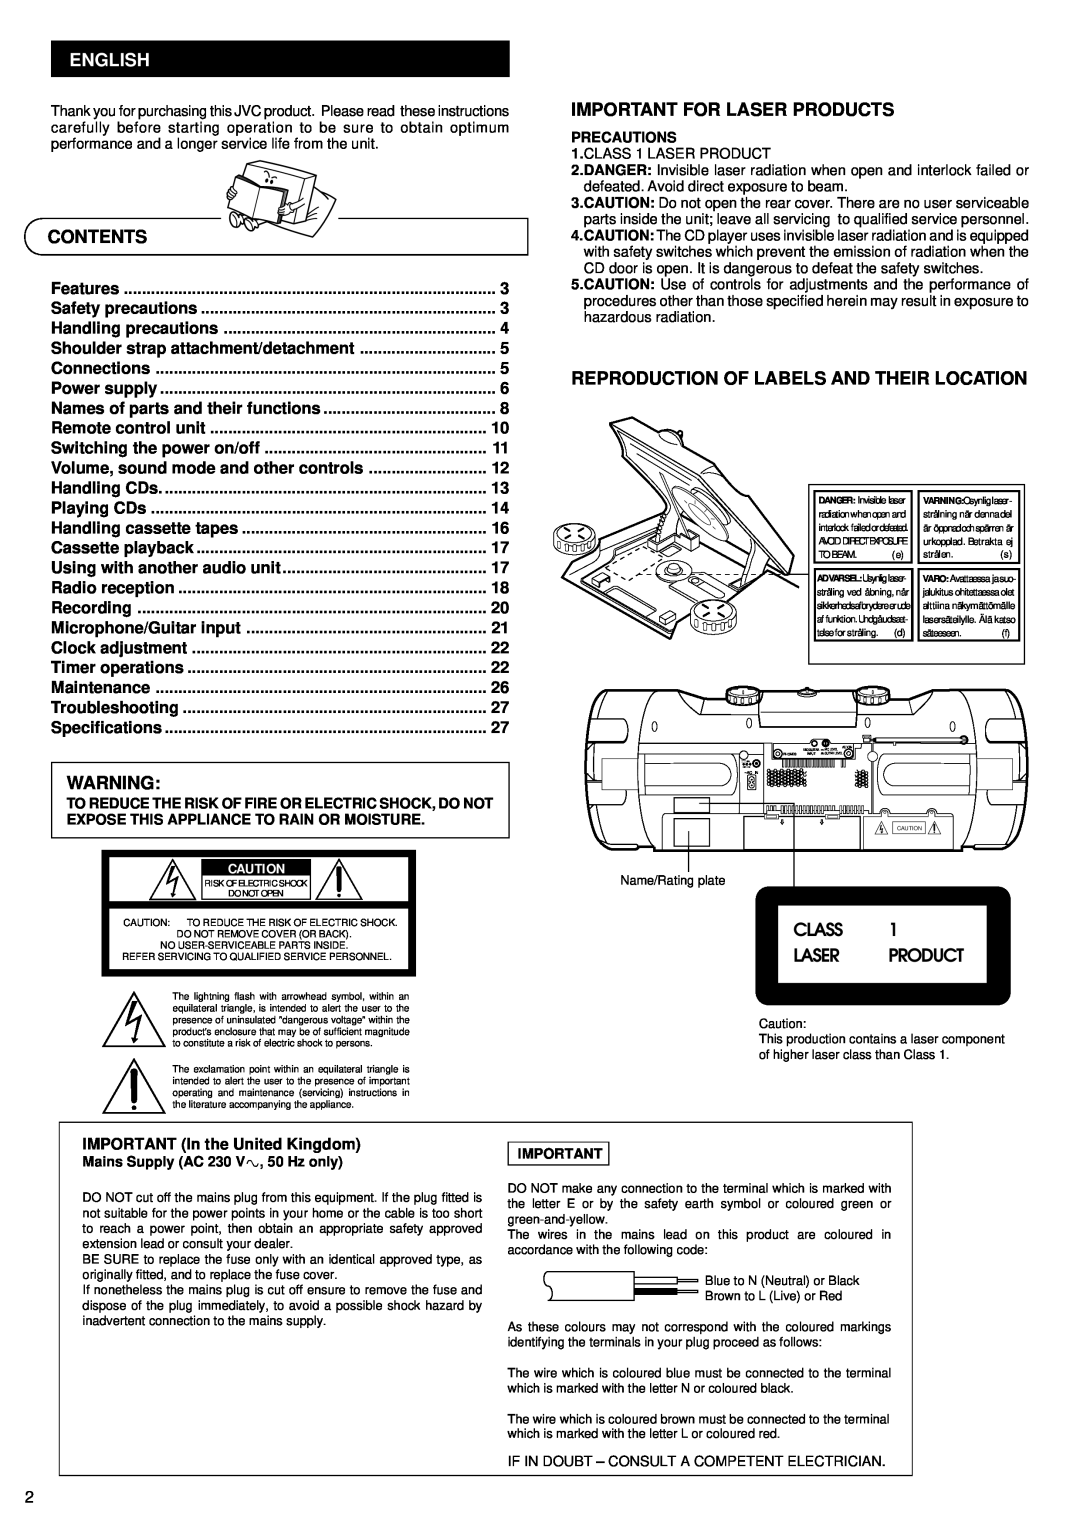 JVC RV-B99 BK/BU manual Contents, Important For Laser Products, Reproduction Of Labels And Their Location, English 